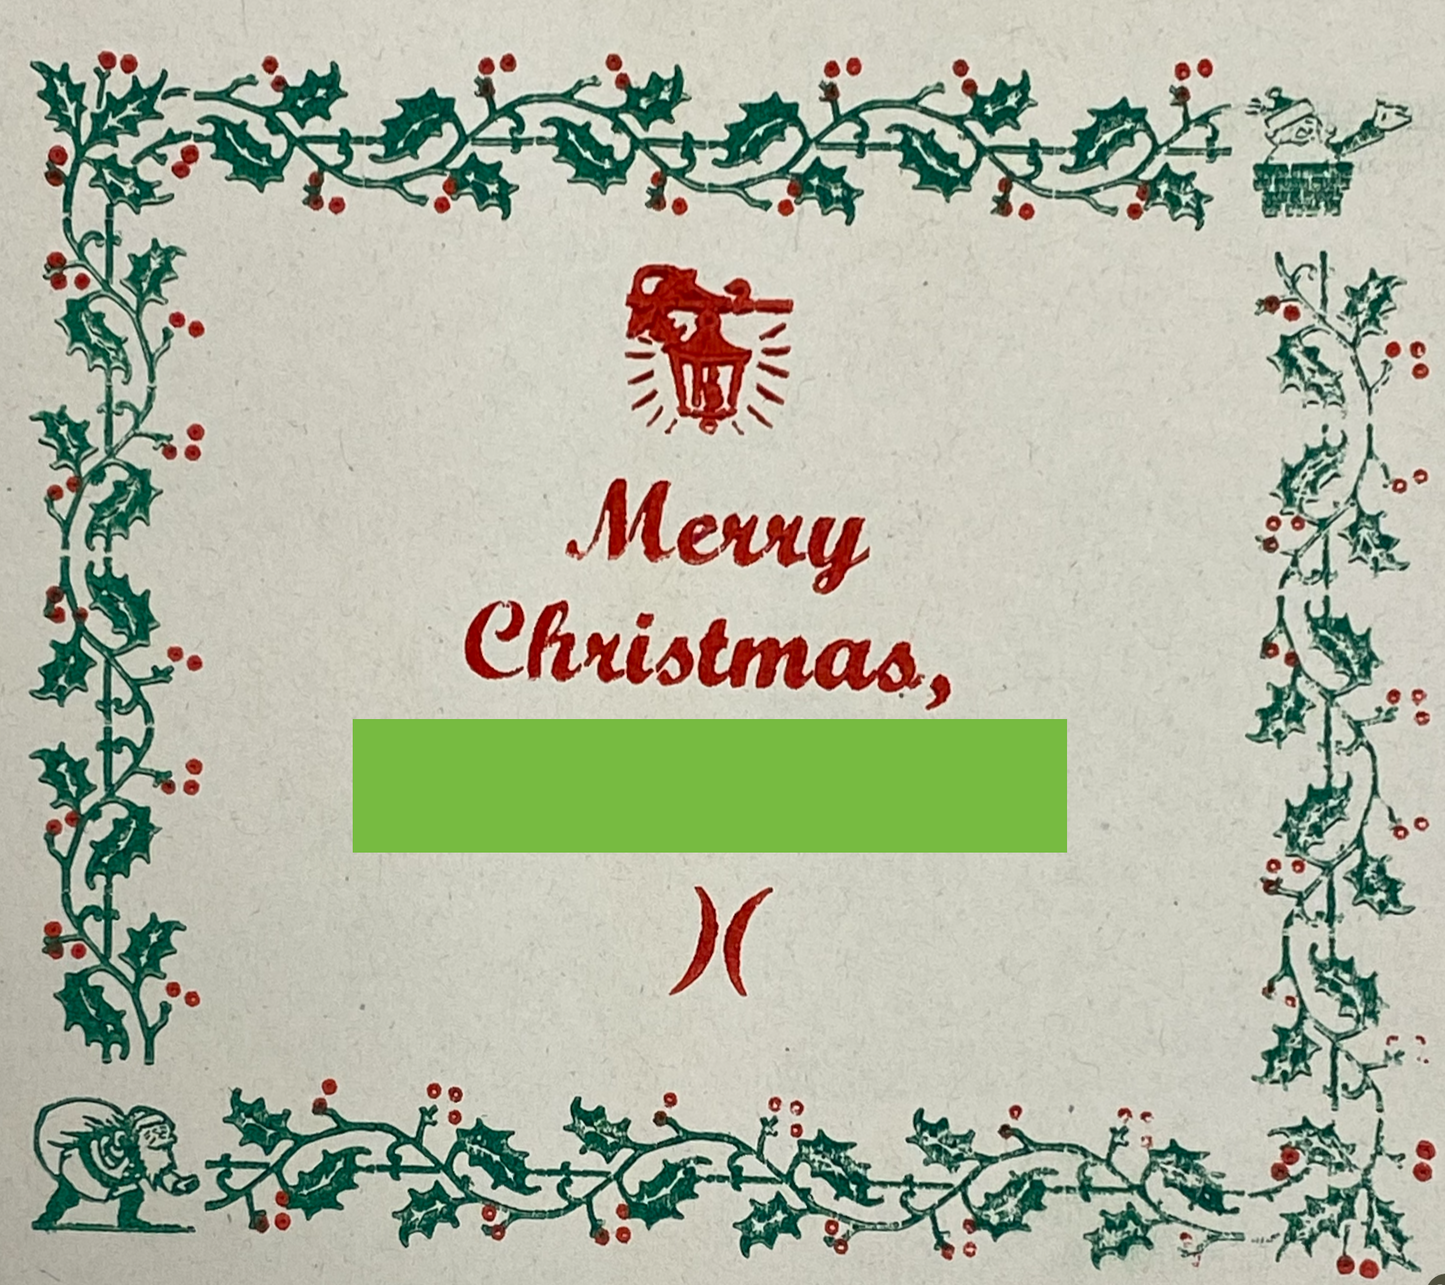 Print Your Own Christmas Cards